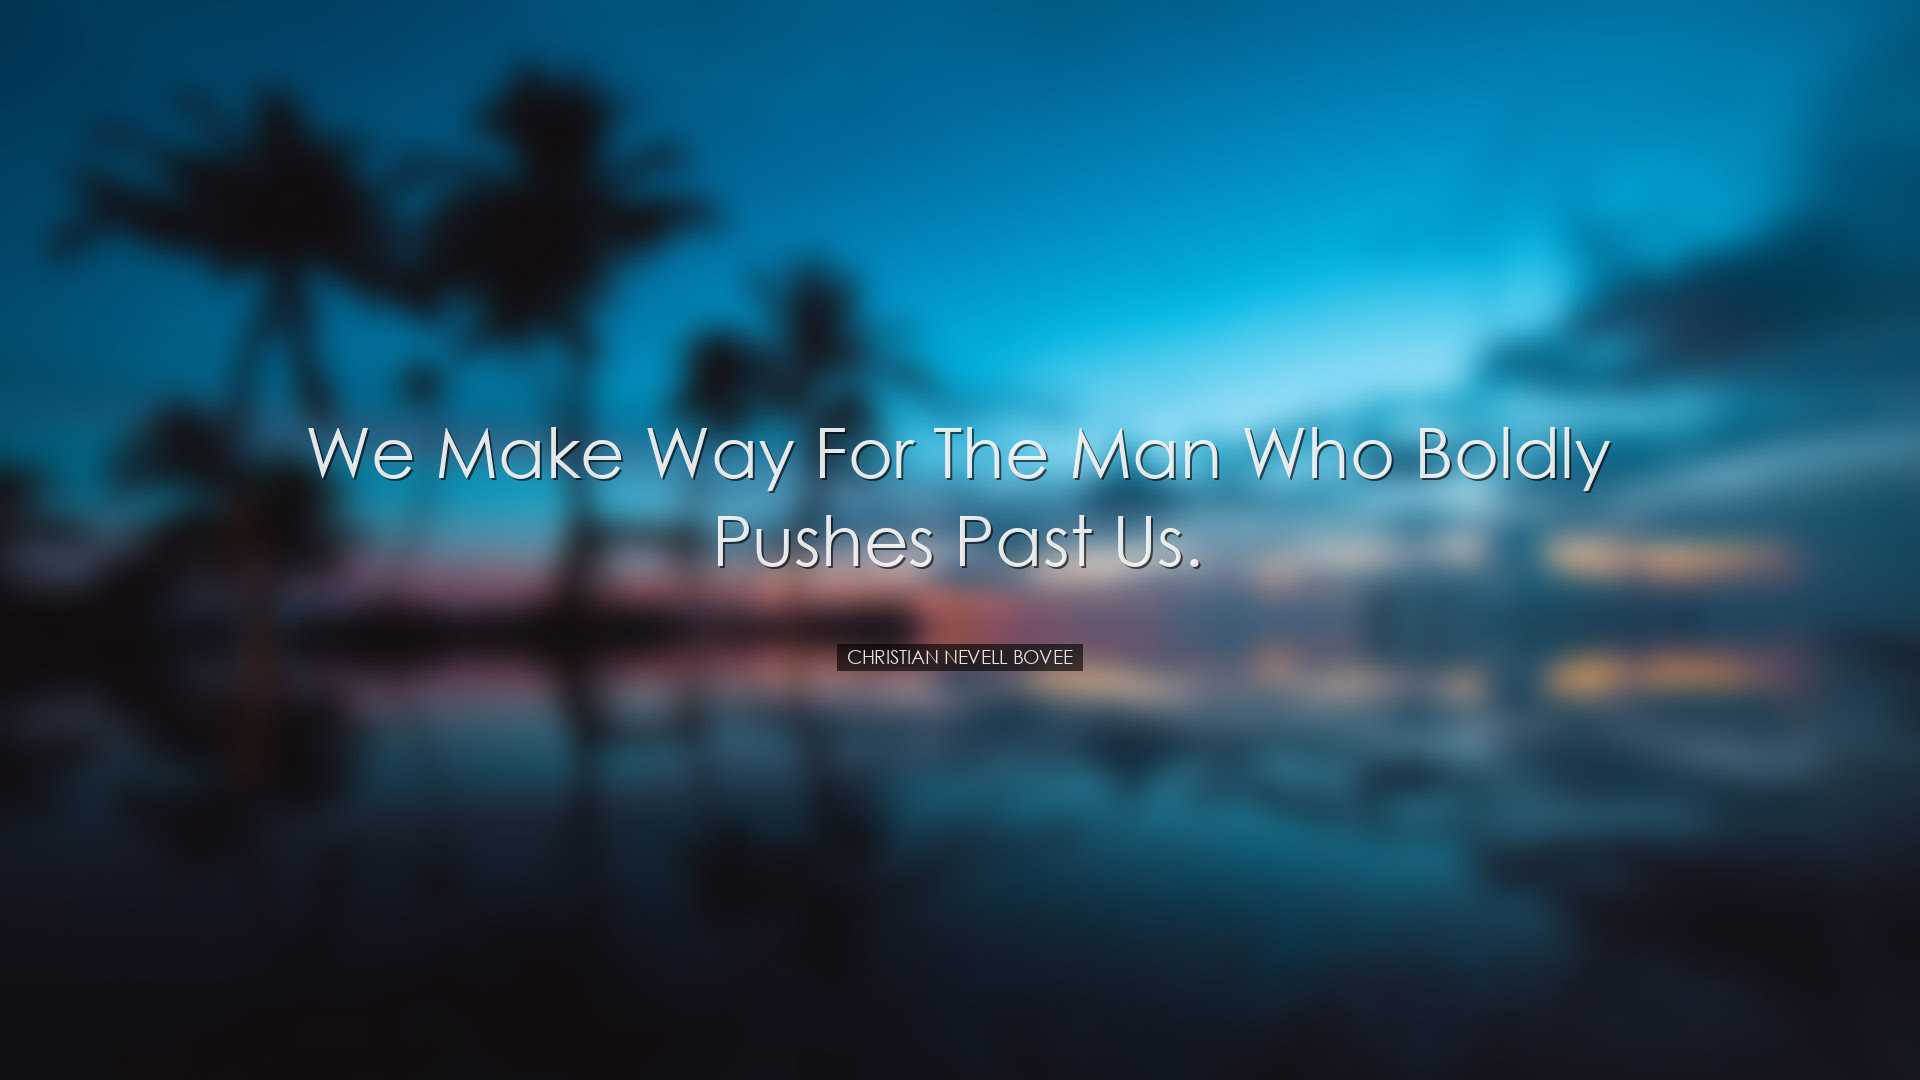 We make way for the man who boldly pushes past us. - Christian Nev